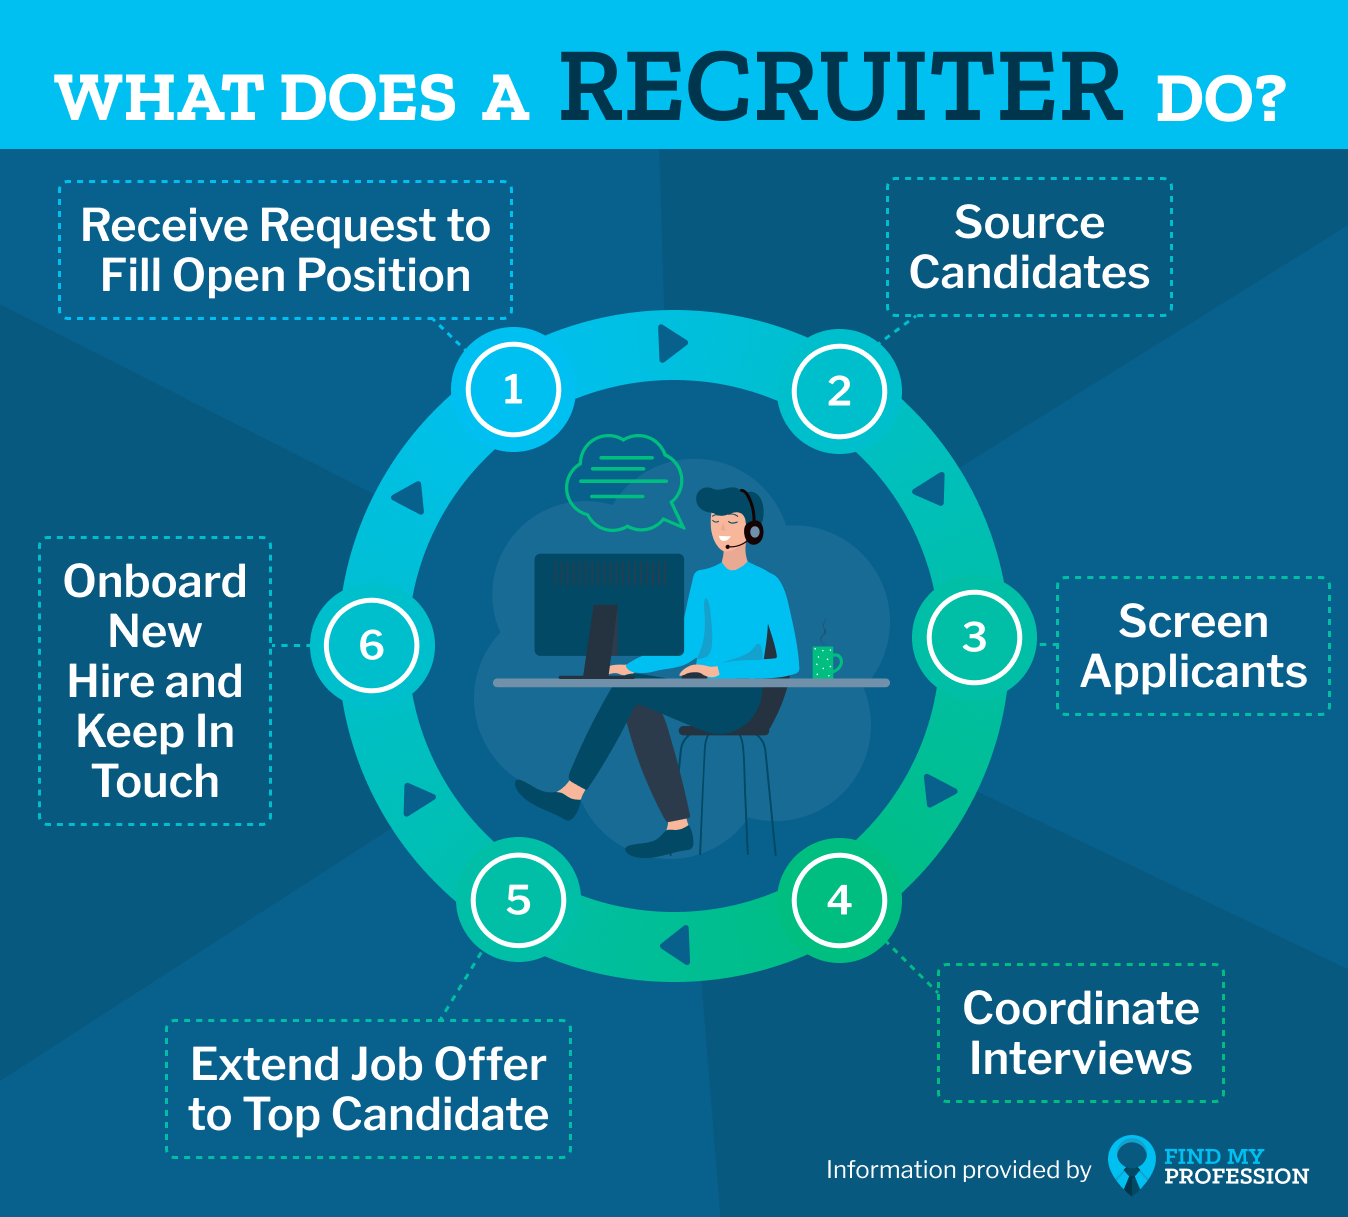 What Does a Recruiter Do?